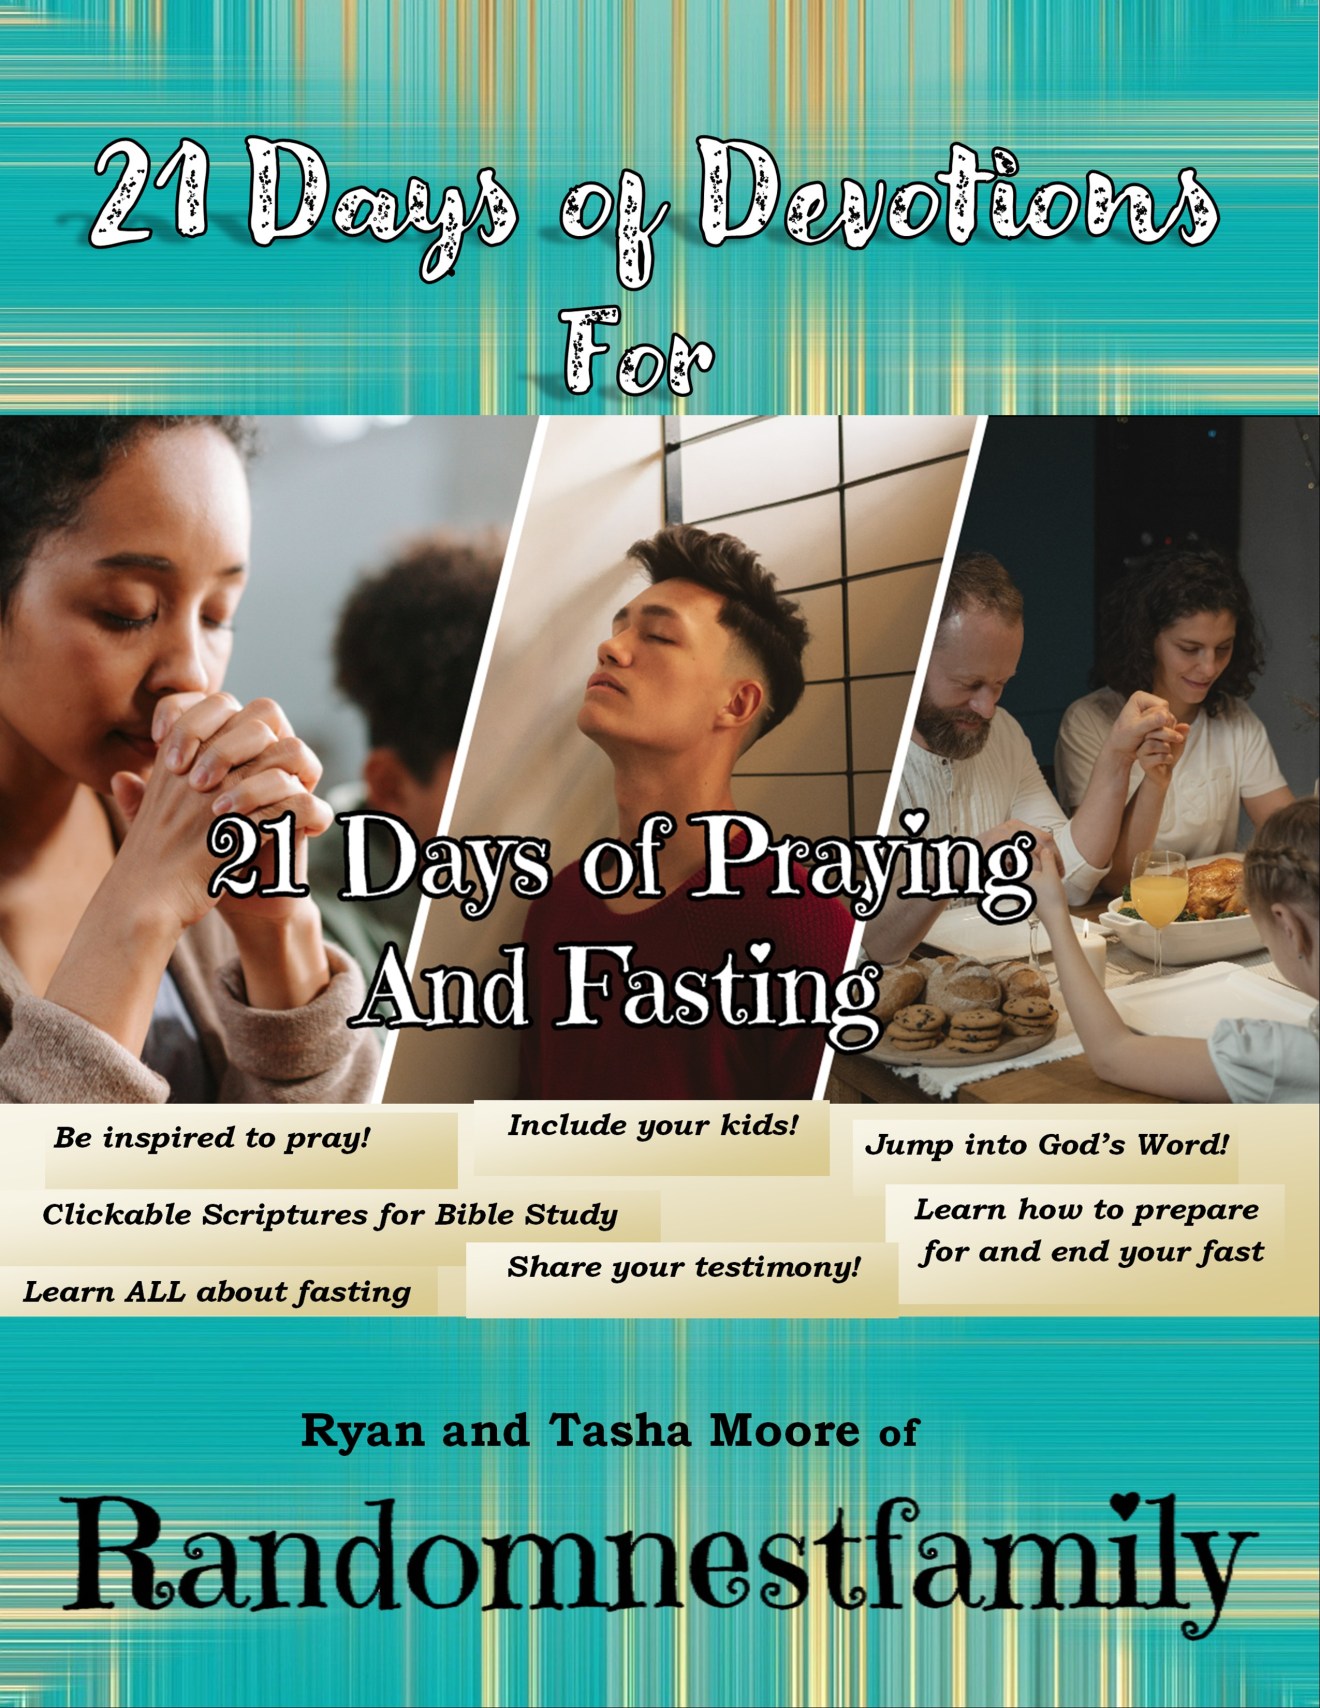 21 Days of Devotions for 21 Days of Praying and Fasting